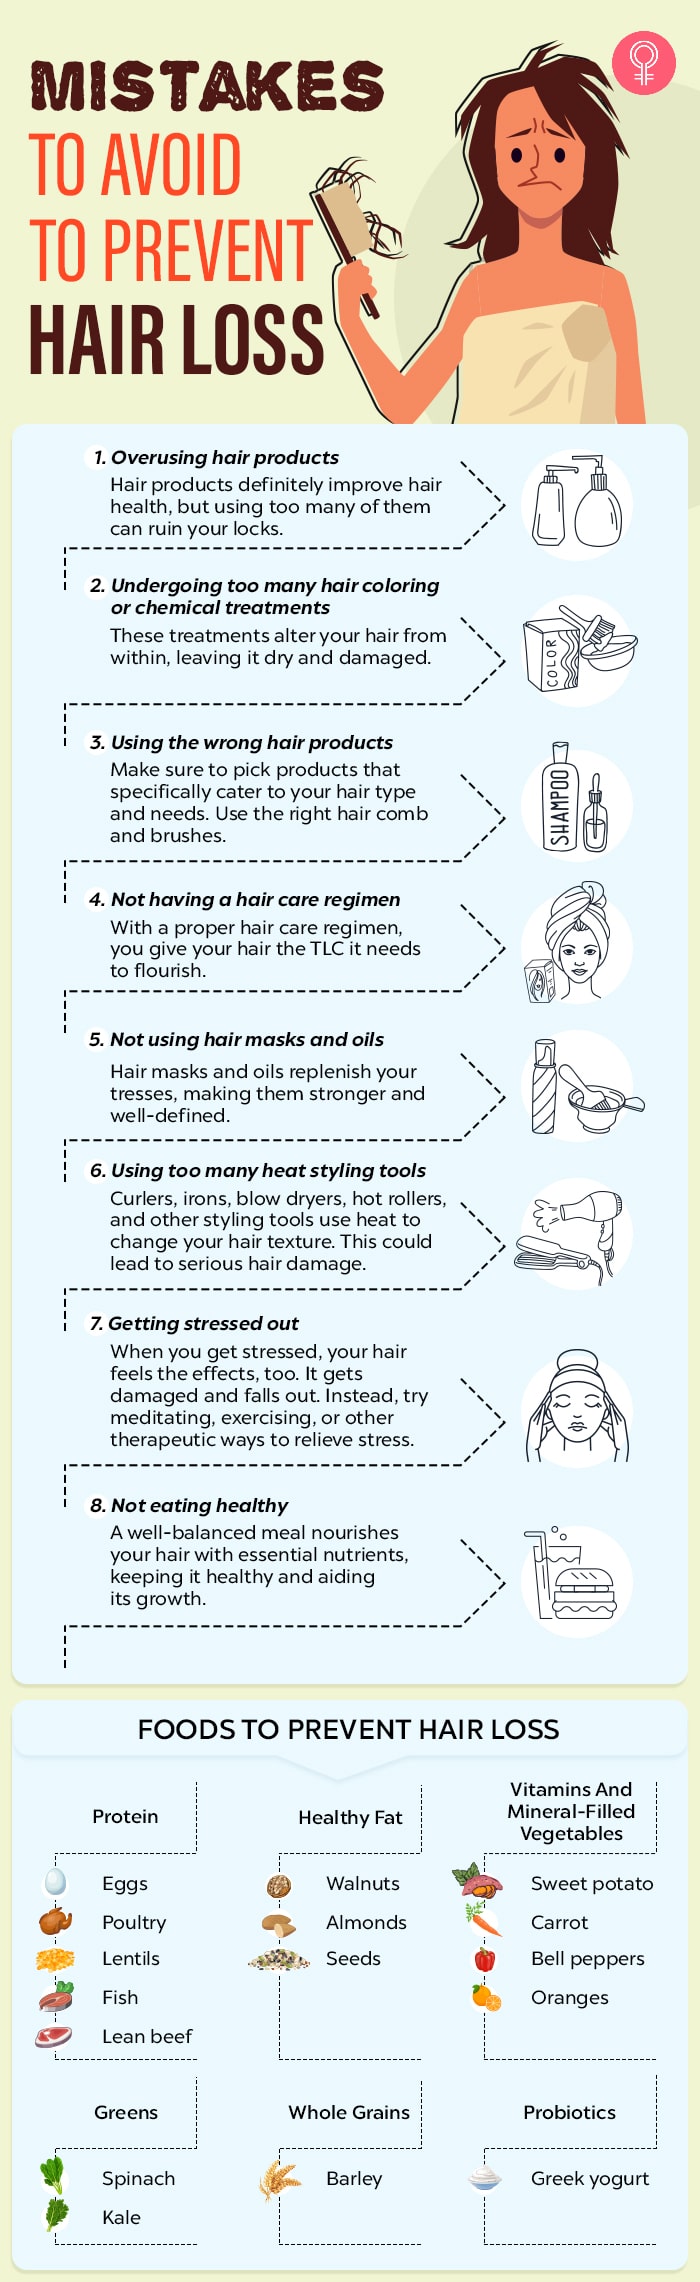 20 Tips, Methods, And Treatments To Stop Hair Fall Naturally